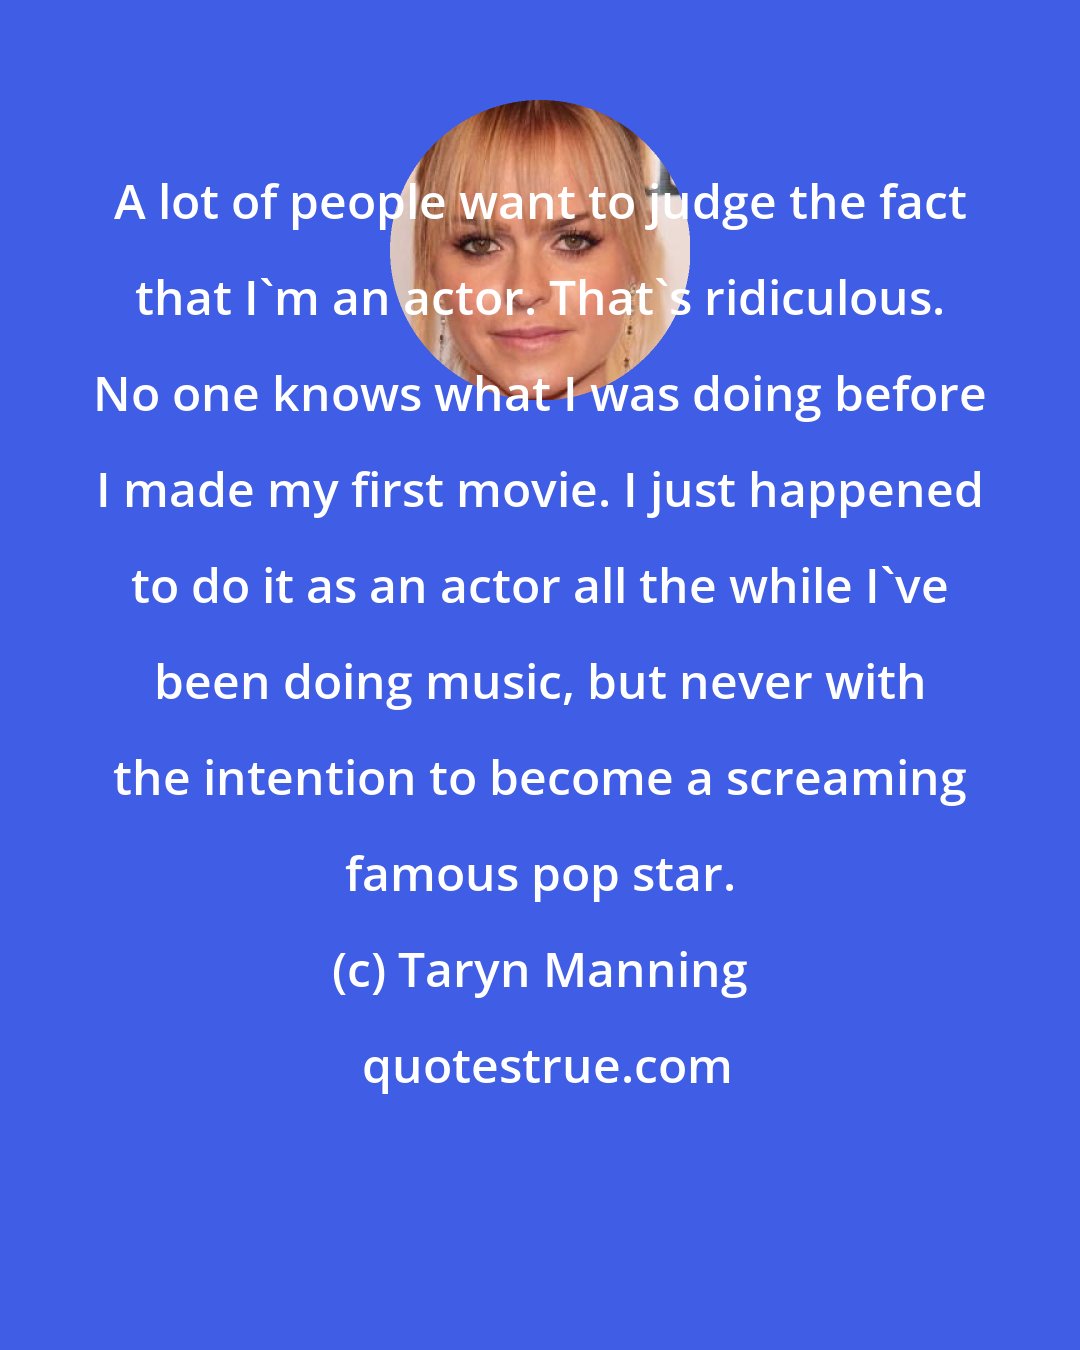 Taryn Manning: A lot of people want to judge the fact that I'm an actor. That's ridiculous. No one knows what I was doing before I made my first movie. I just happened to do it as an actor all the while I've been doing music, but never with the intention to become a screaming famous pop star.